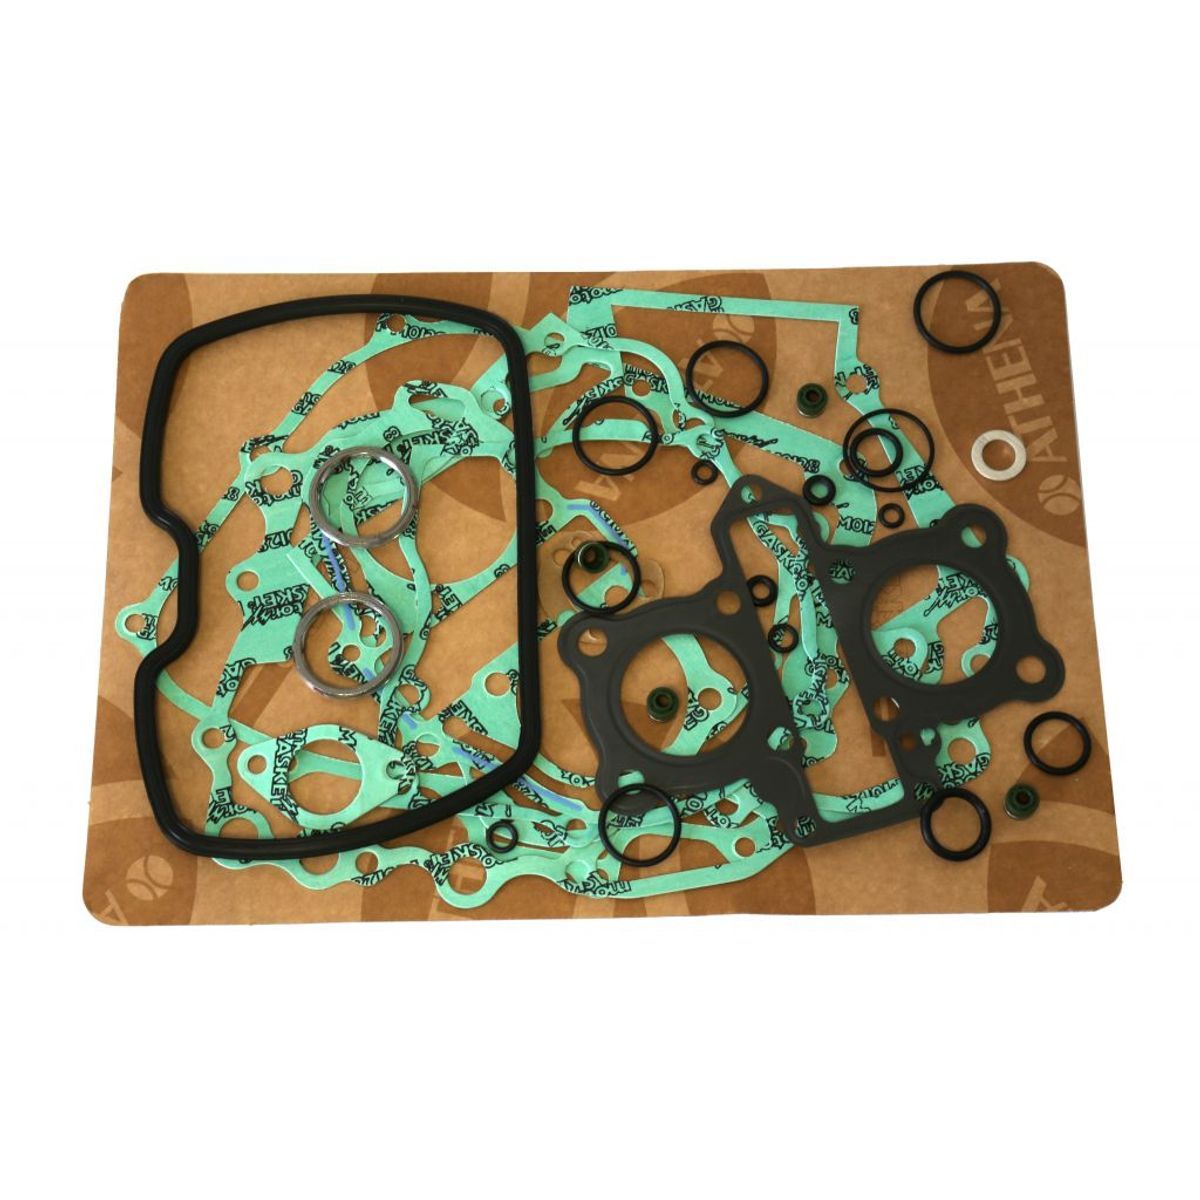 Motorcycle Gaskets Large assortment on